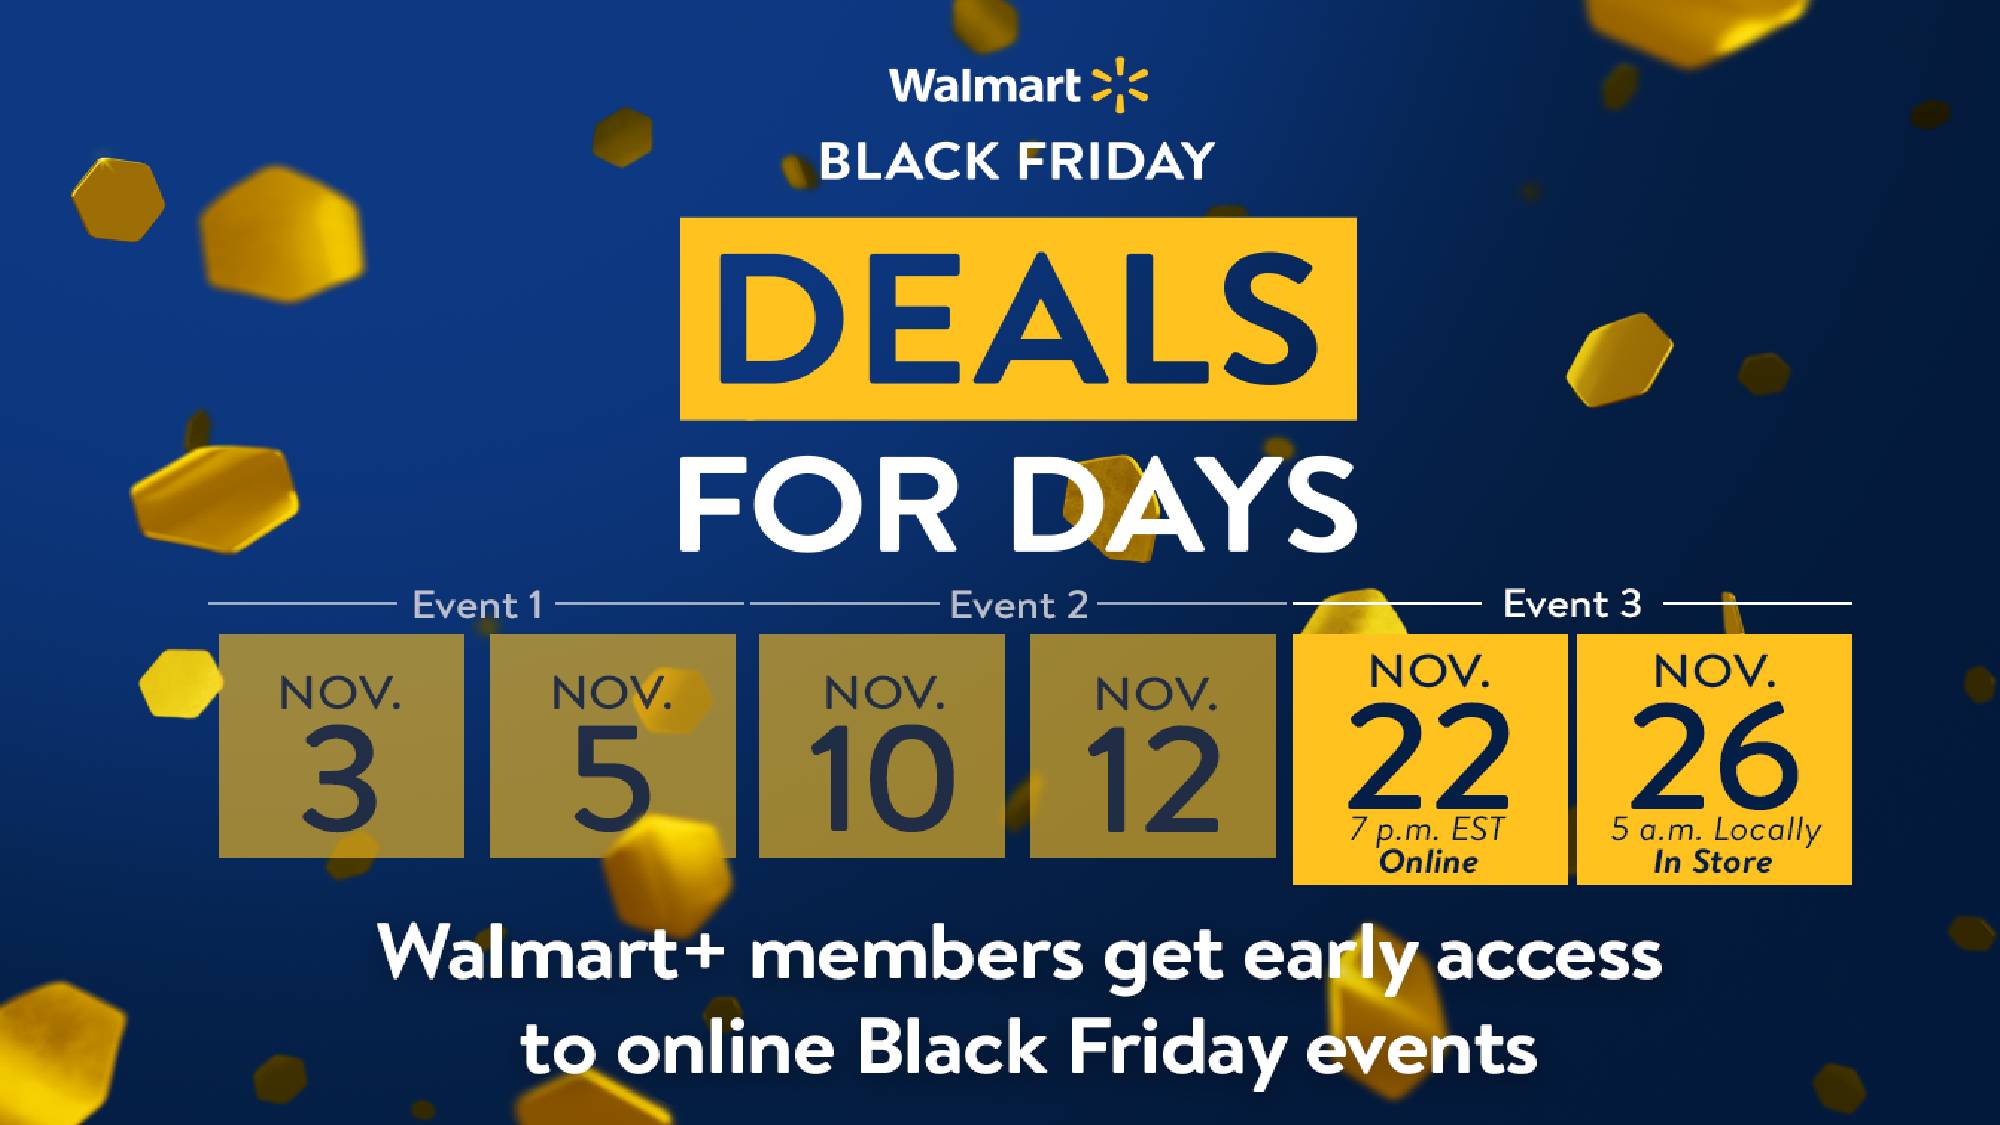 Walmart Deals for Day ad